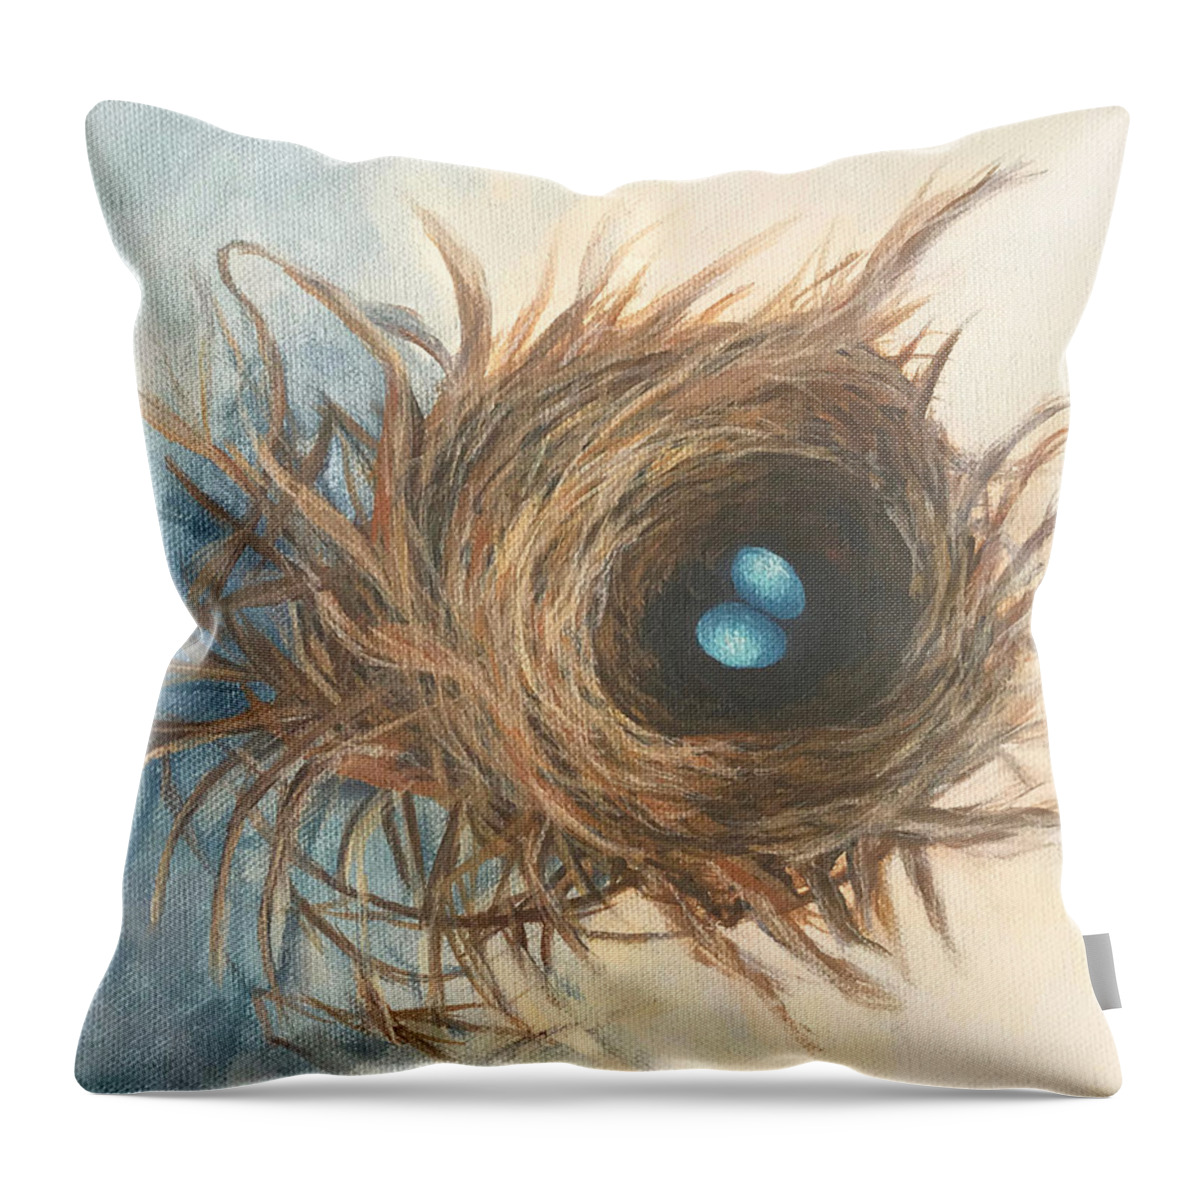 Nest Throw Pillow featuring the painting The Scattered Nest by Torrie Smiley